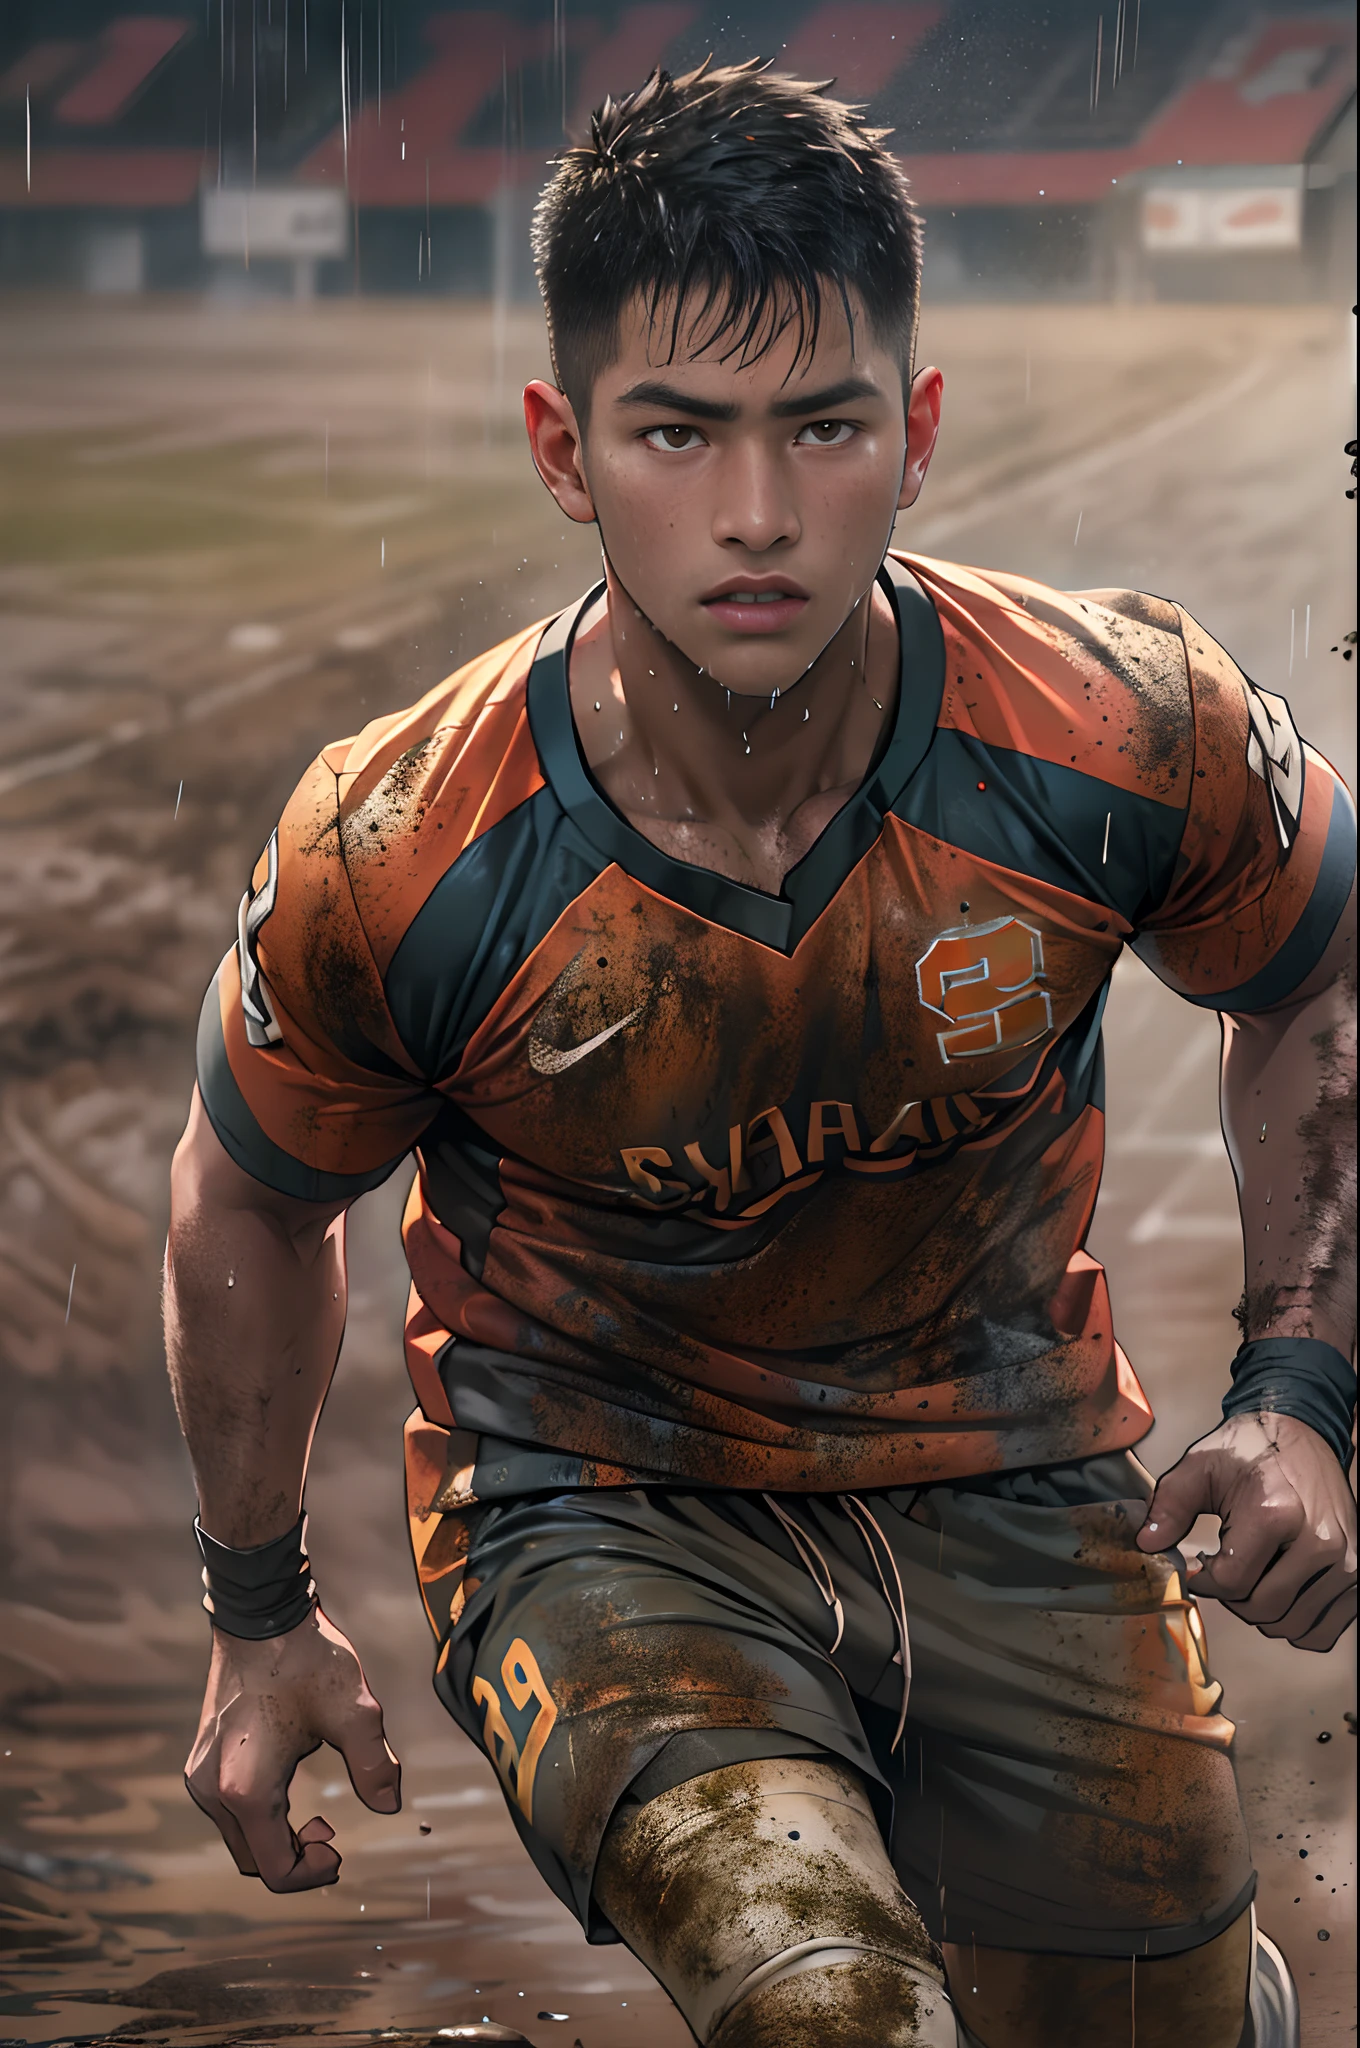 (((1man))),serious face of syahmi,malay, muscular, (brown eyes),sport clothes,(tight jersey), handsome, jock, dynamic, (sfw),(football player), (running on field with muddy),(dirty),(body sweat),(mud on cloth),wet sock,raining,stadium,(cloudy),(intricate details, Masterpiece, high quality, best quality, realistic), (musclebears:0.25), realistic,8K UHD, DLSR,Cinematic lighting,dynamic pose, accurate proportions, warm natural lighting, natural shadows,